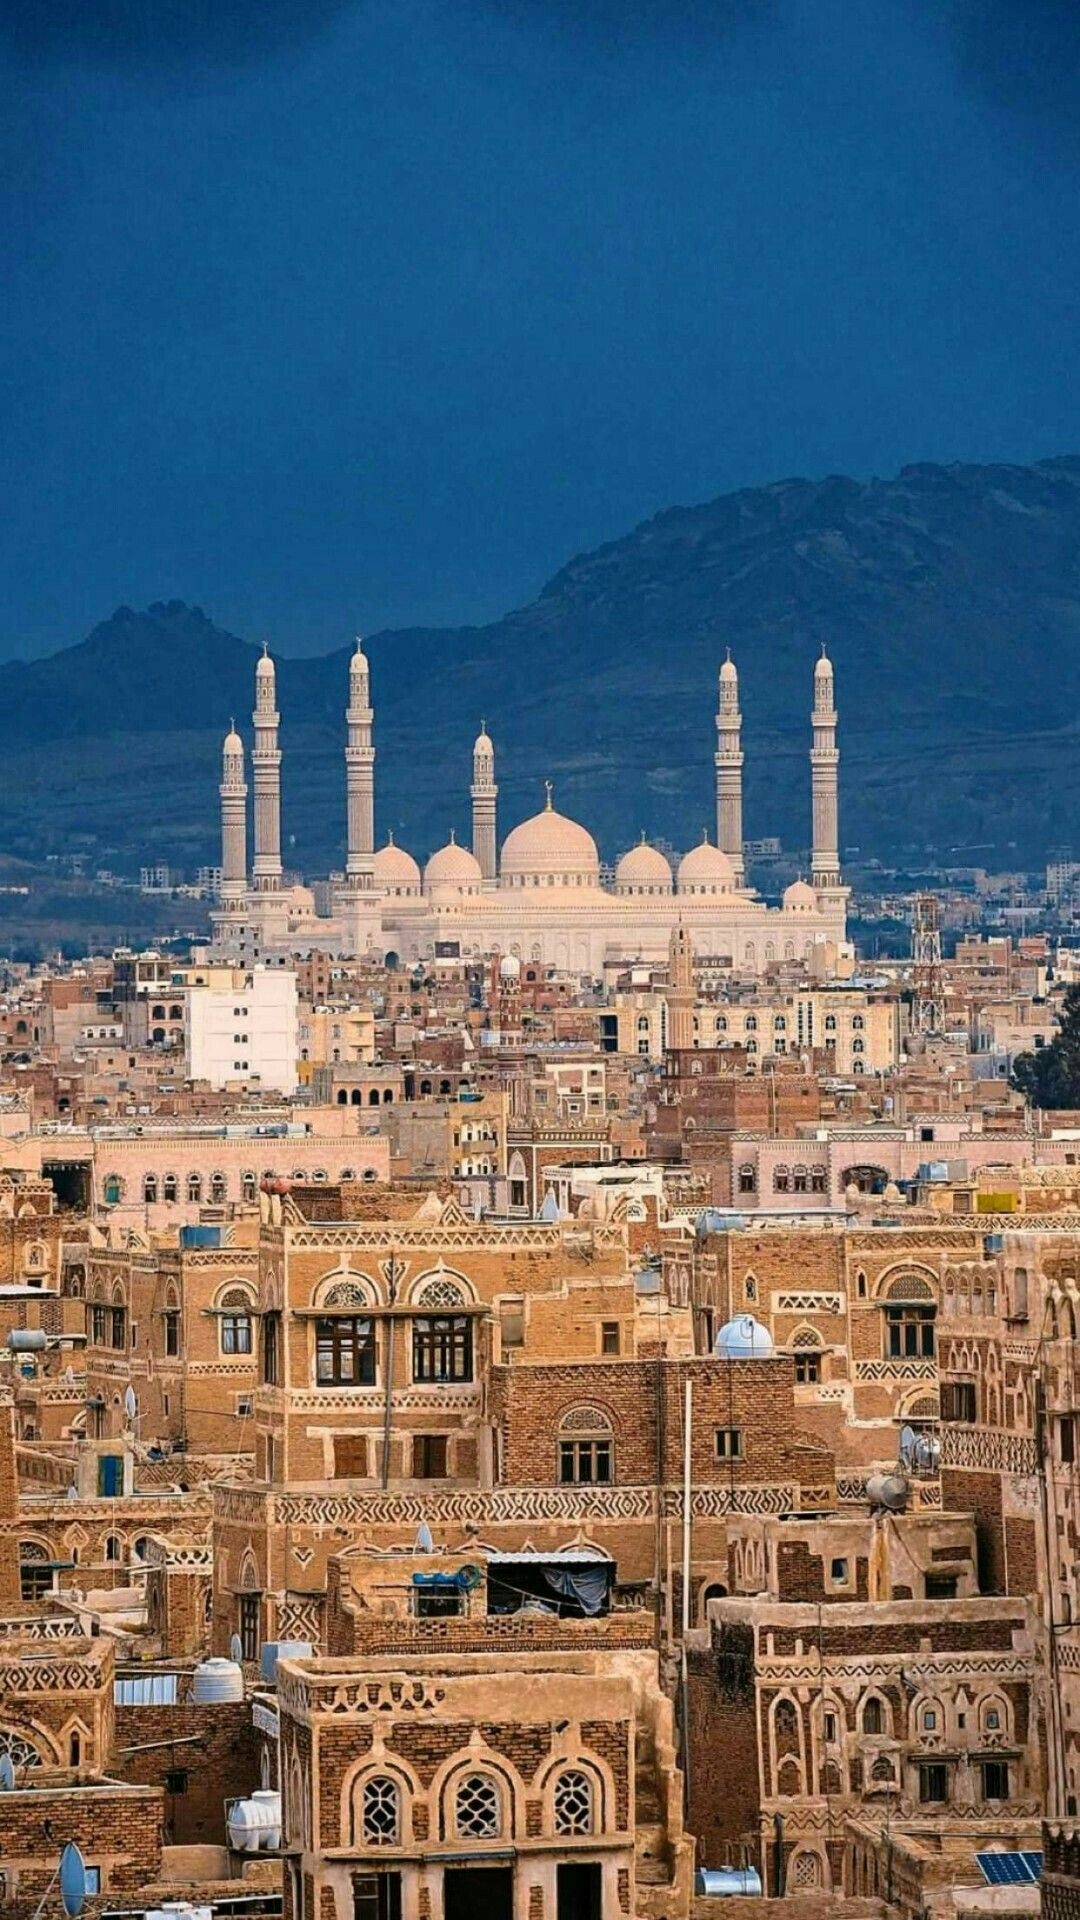 Yemen, Inspirational images, Cultural heritage, Vibrant colors, 1080x1920 Full HD Handy